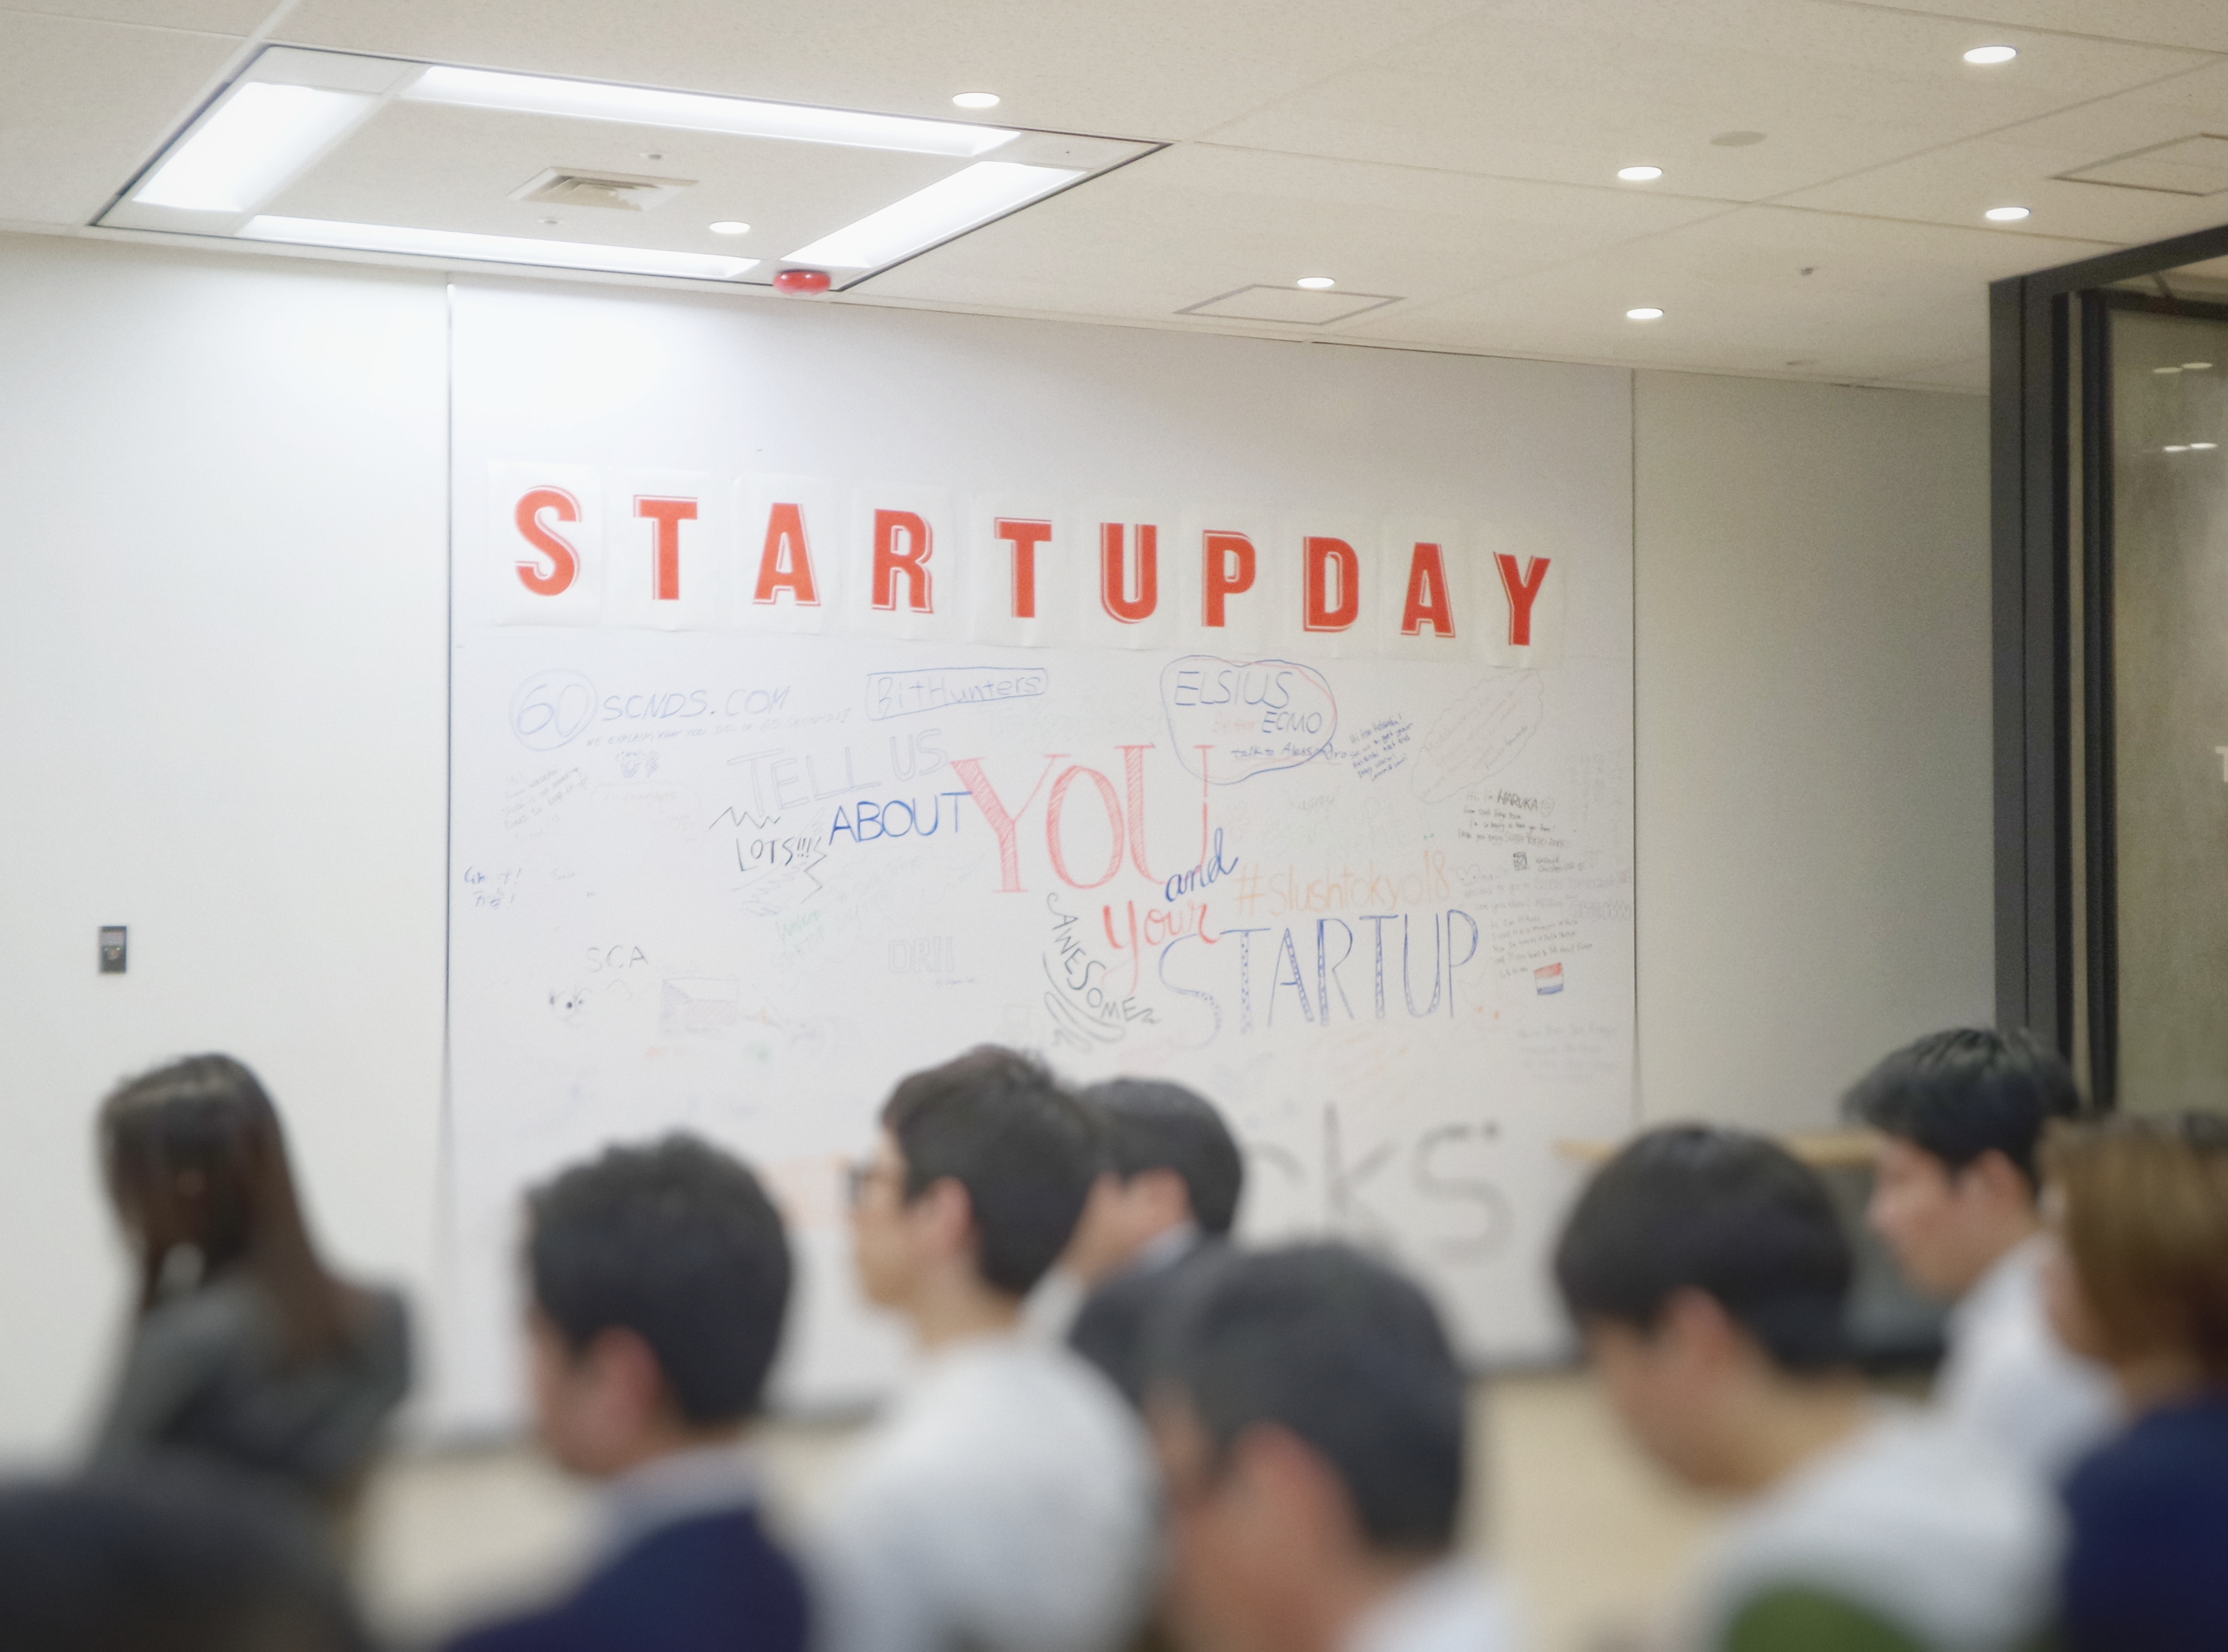 Soft focus of a group of people in a conference room with a white board saying “Startupday.” Image by Franck V., via Unsplash.com.